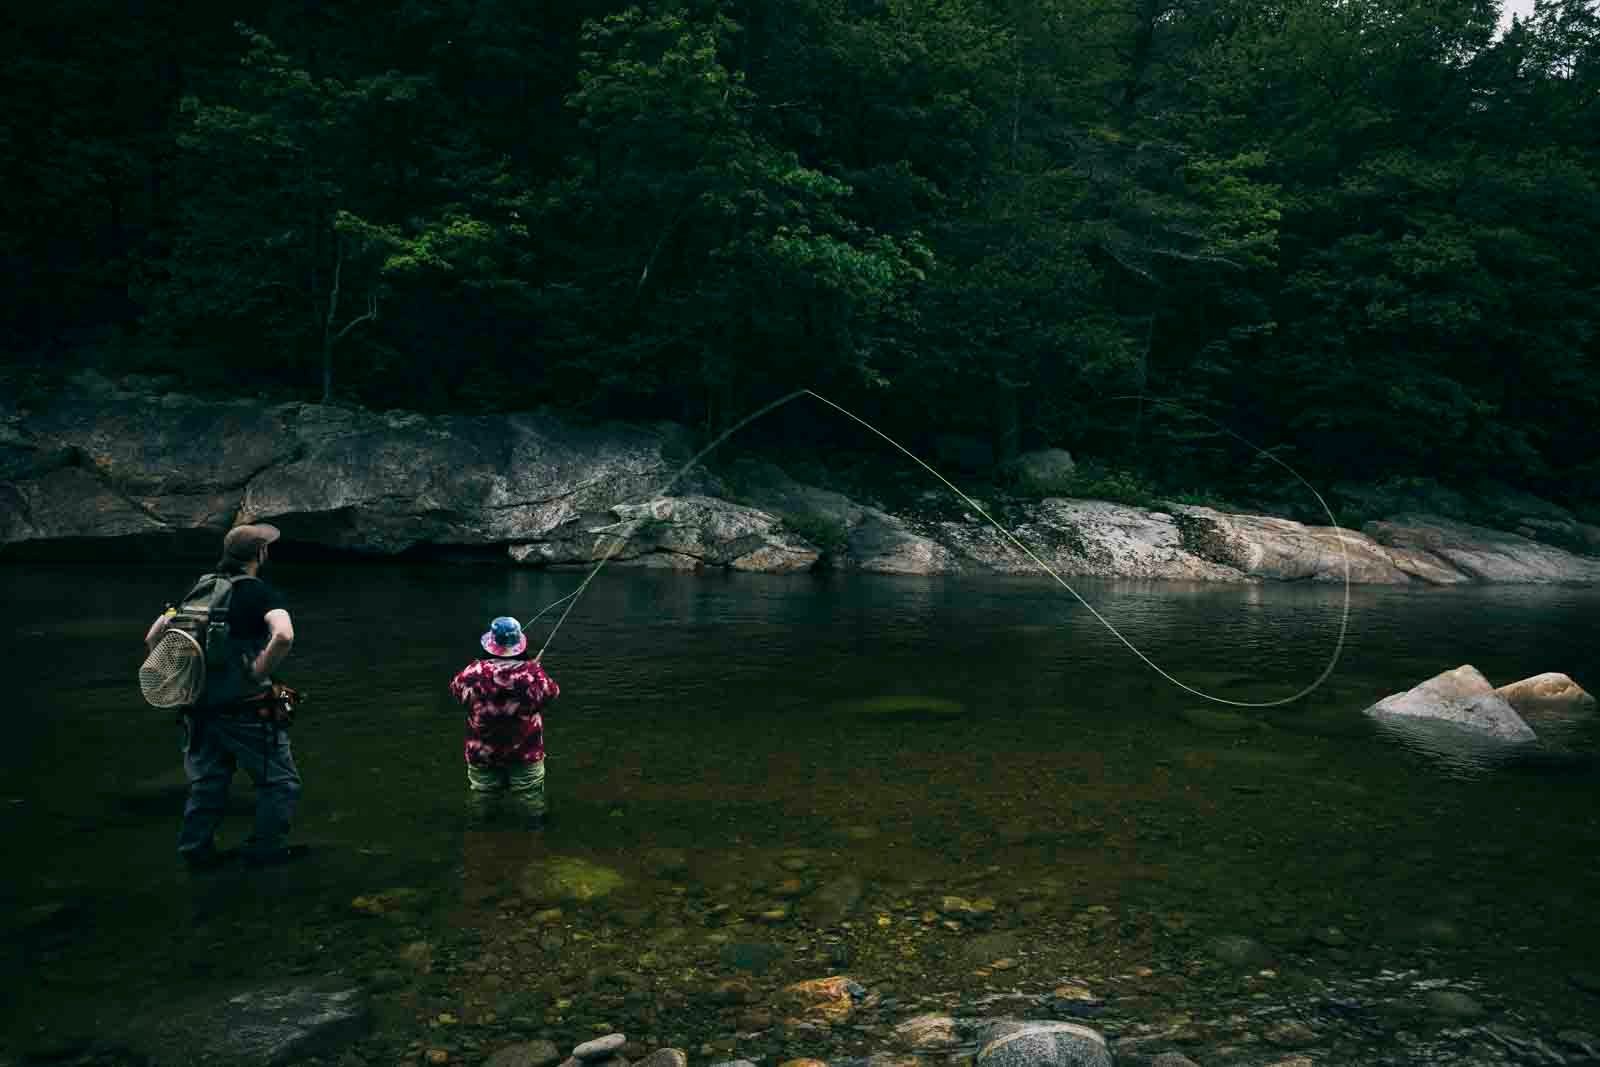  Zsakee (she/her) and Jared (he/him) look out over the Wild River, fly line in air. Photo:  Joe Klementovich  